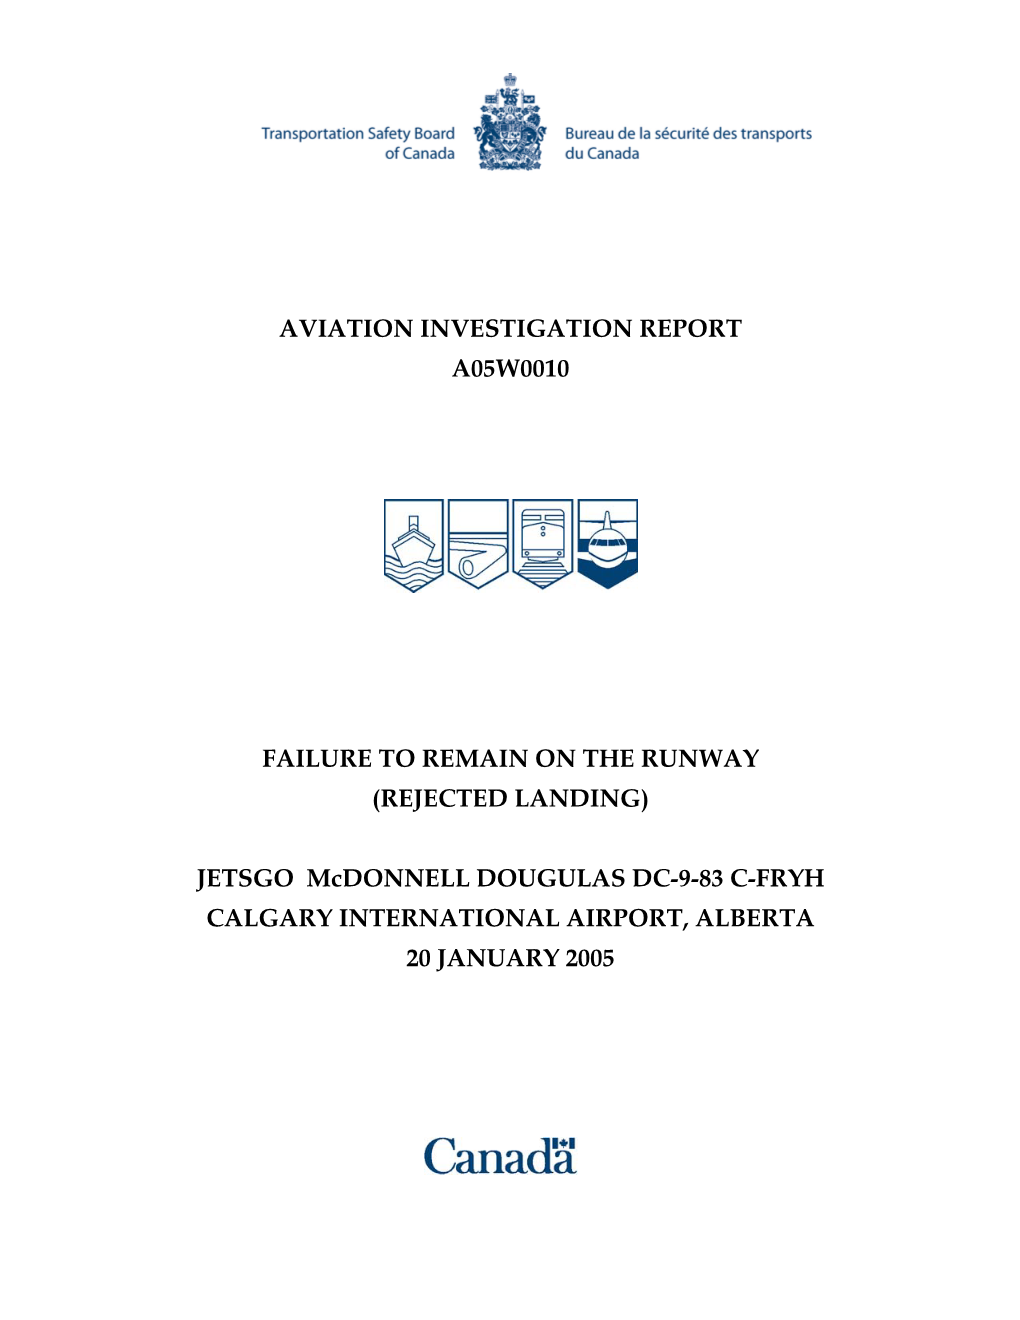 Aviation Investigation Report A05w0010 Failure to Remain